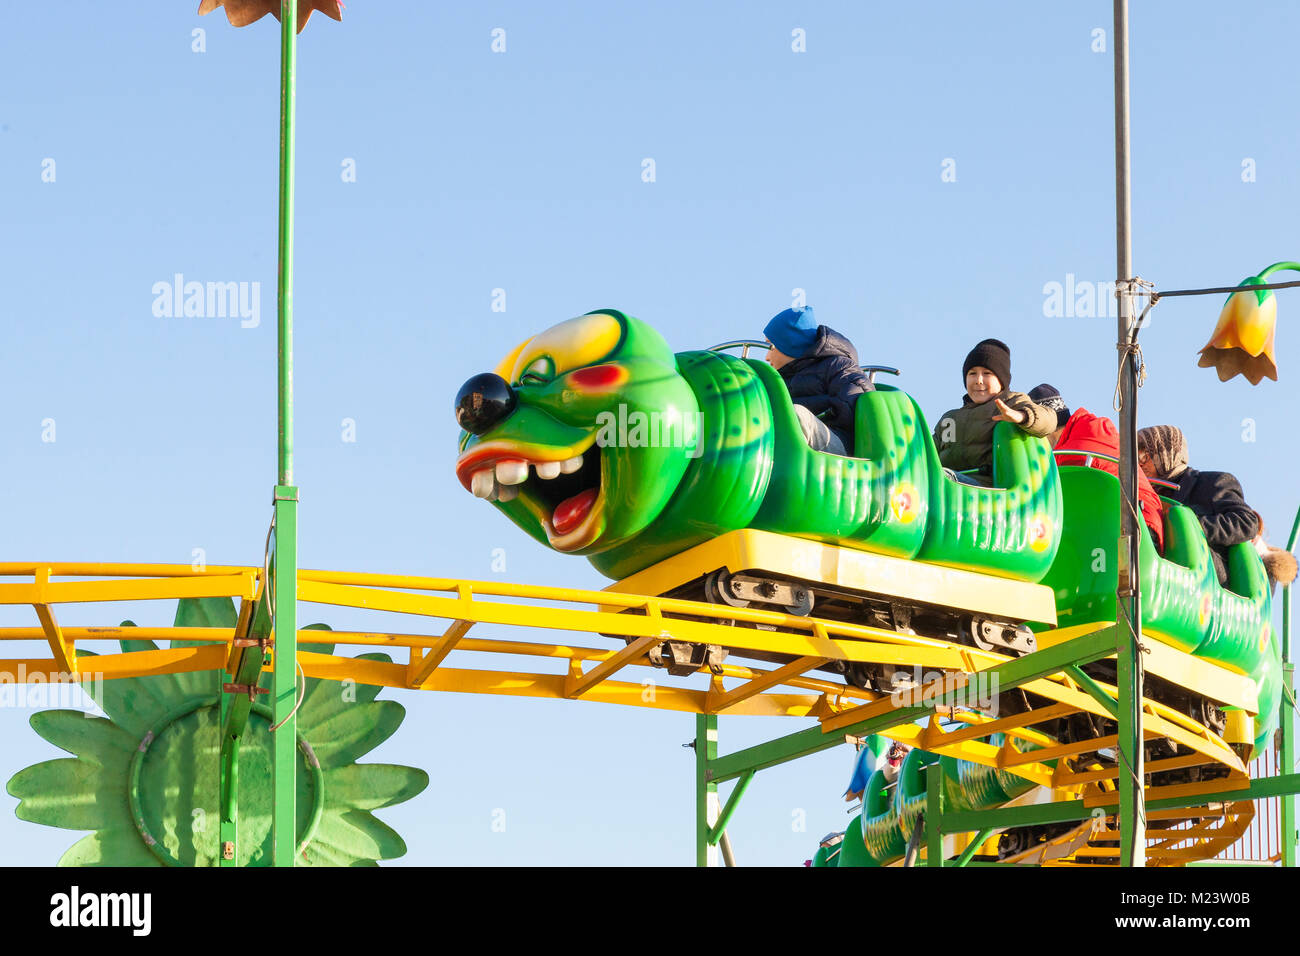 Young children and parents riding on a Wacky Worm style roller coaster at a funfair. Close up against blue sky Stock Photo